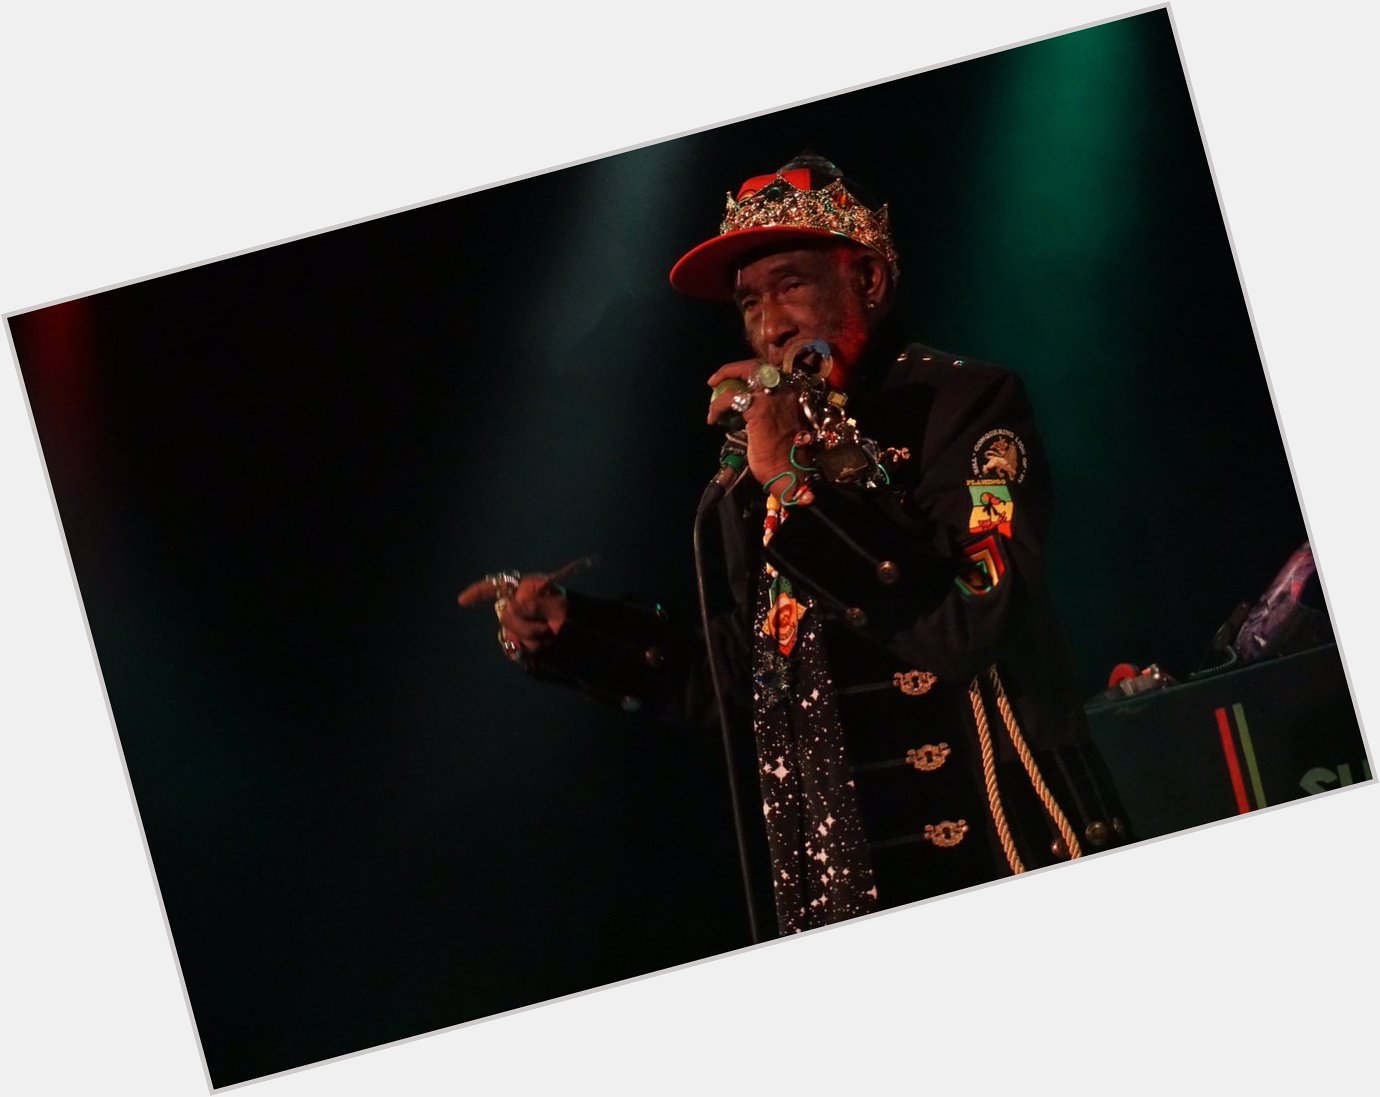 Happy Birthday Lee Scratch Perry! Intergalactic interview in your latest Tape Op. 